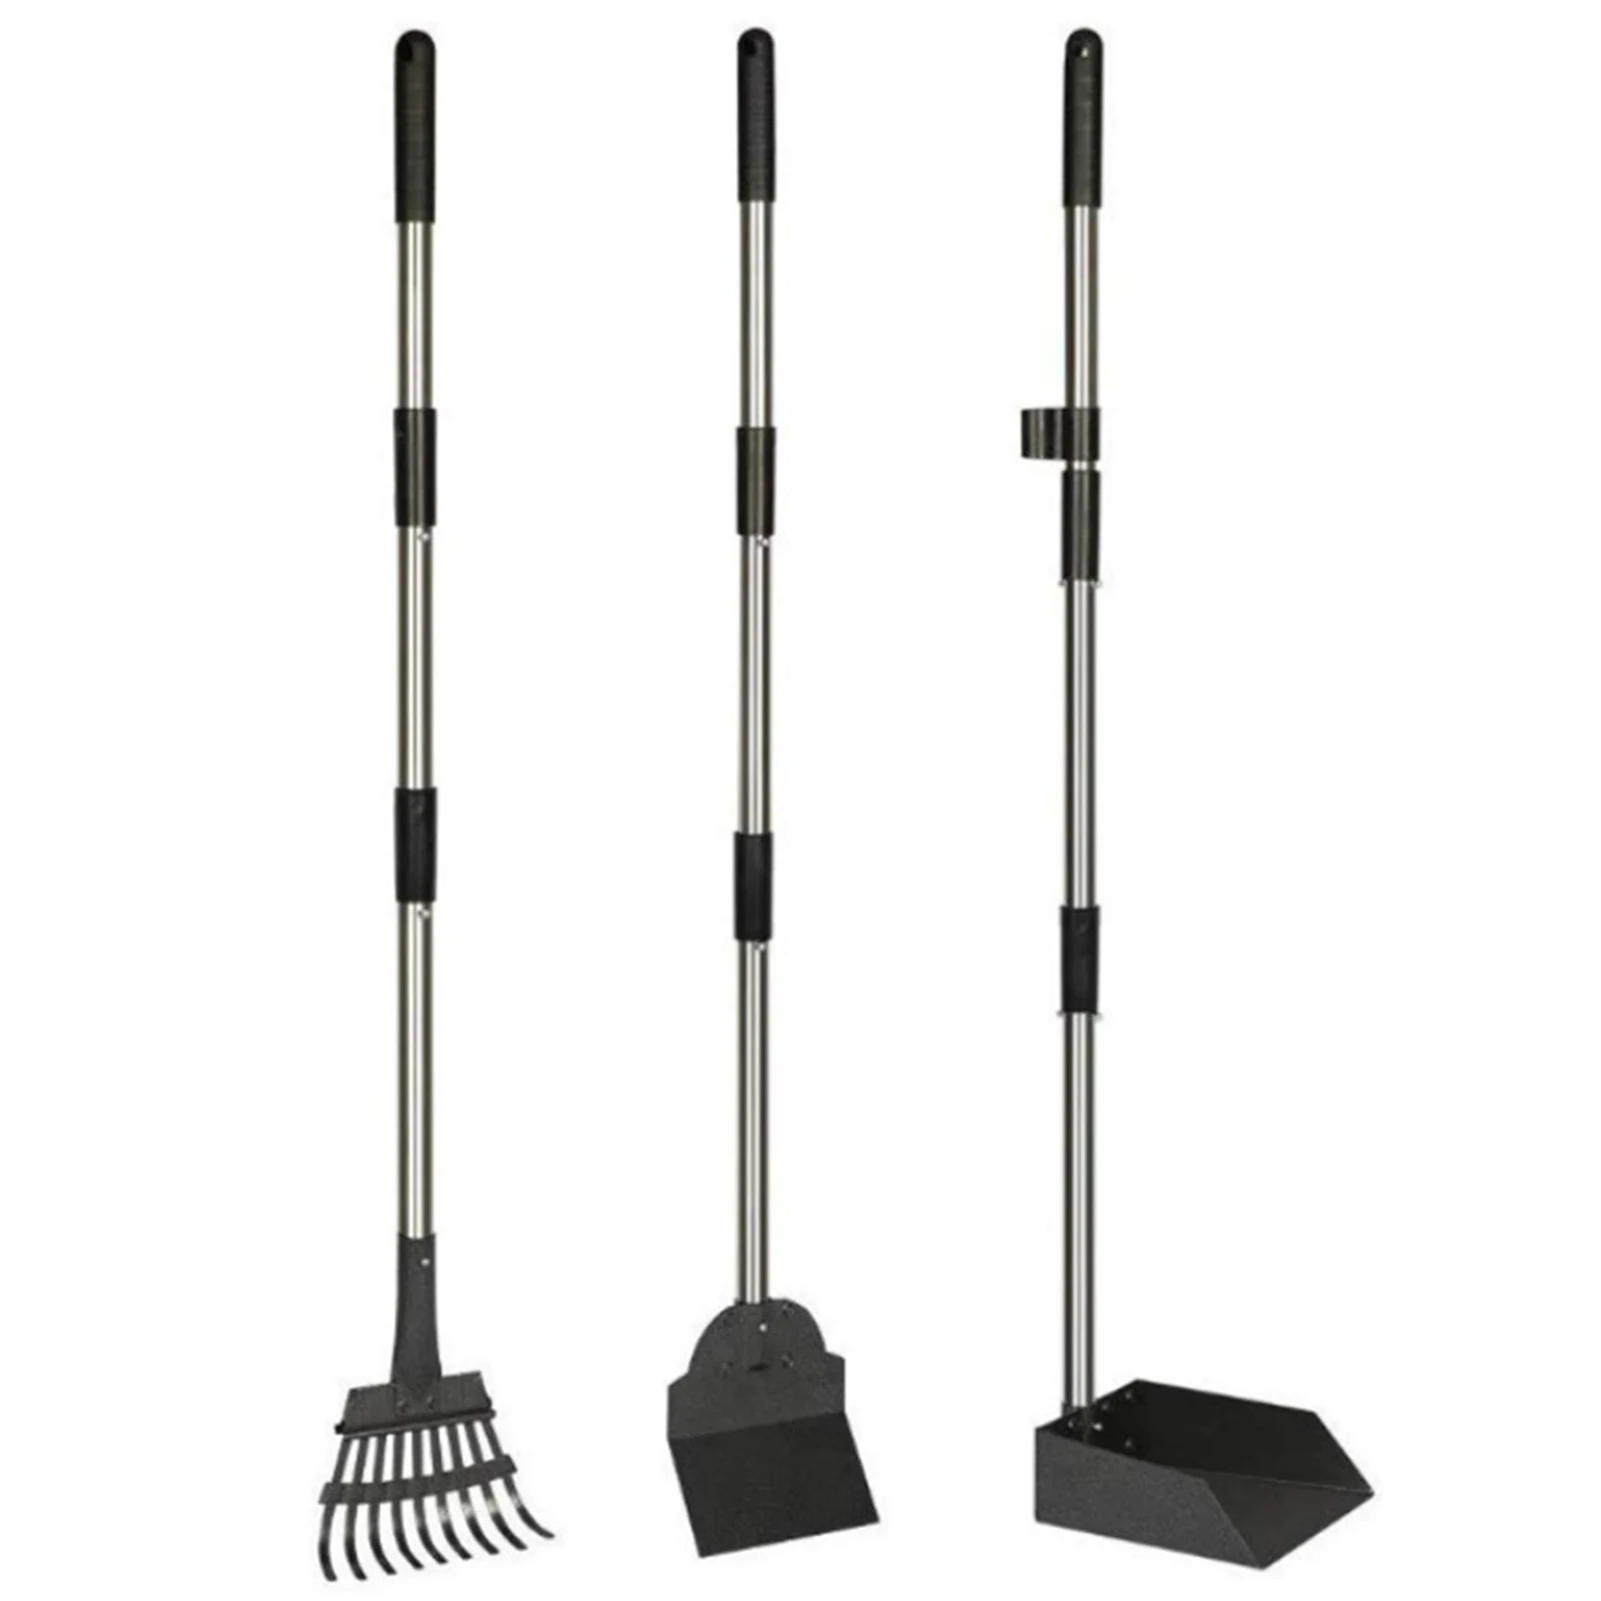 

Dog Pooper Scooper With Metal Rake Tray & Spade For Large Medium Small Dogs Pets Great For Grass Dirt Gravel